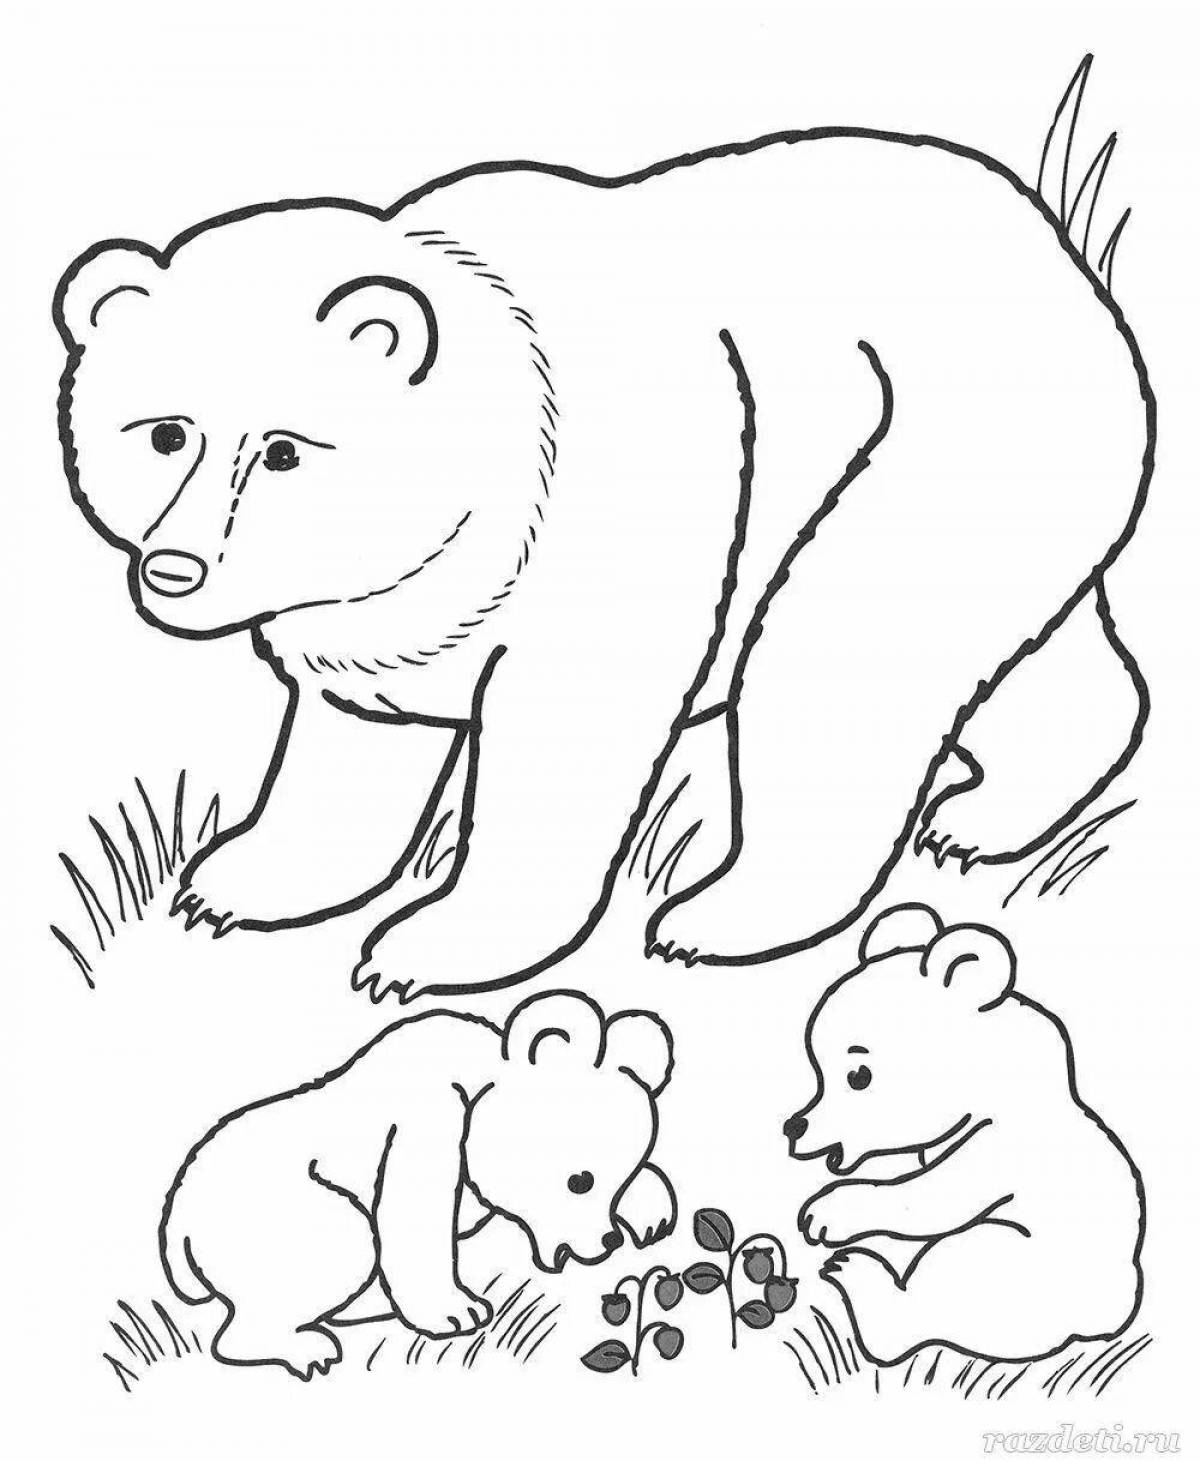 Fun coloring of wild animals and babies